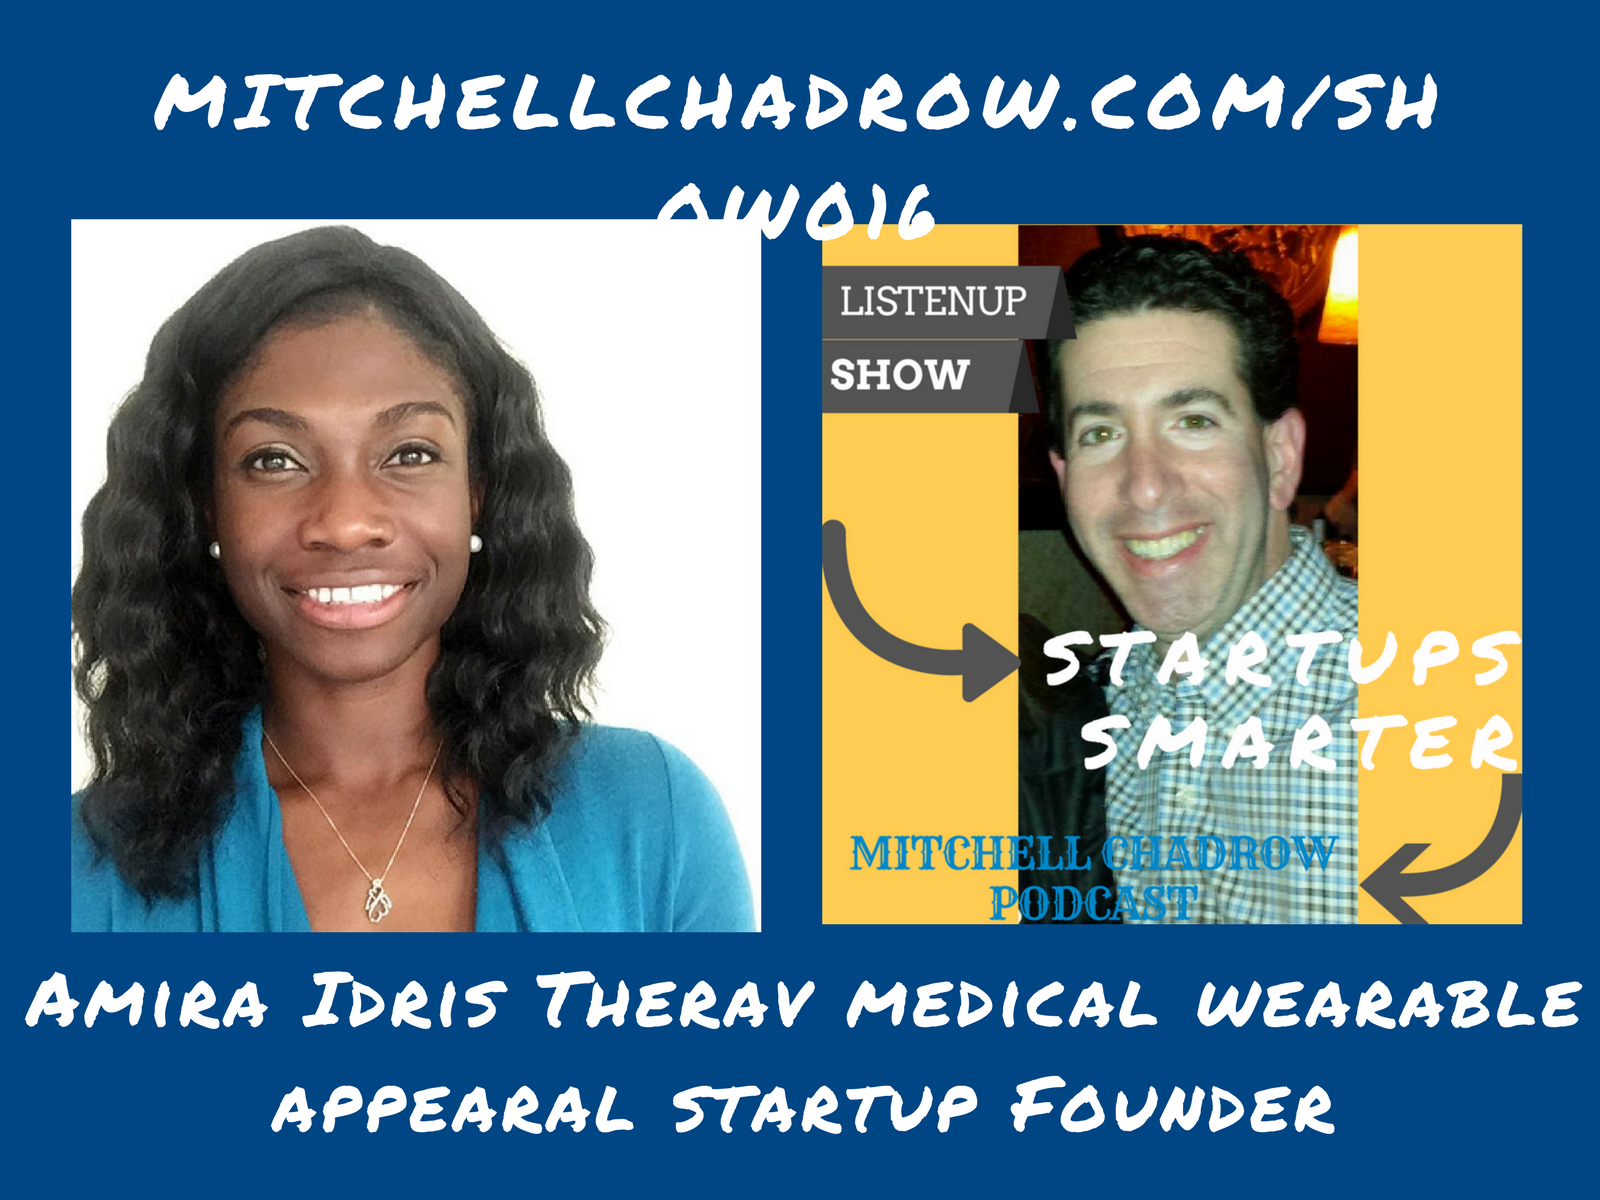 Amira-Idris-Therav-Medical-Wearable-Apparel-Startup-Founder-Listen-Up-Show-Mitchell-Chadrow-Podcast-.png